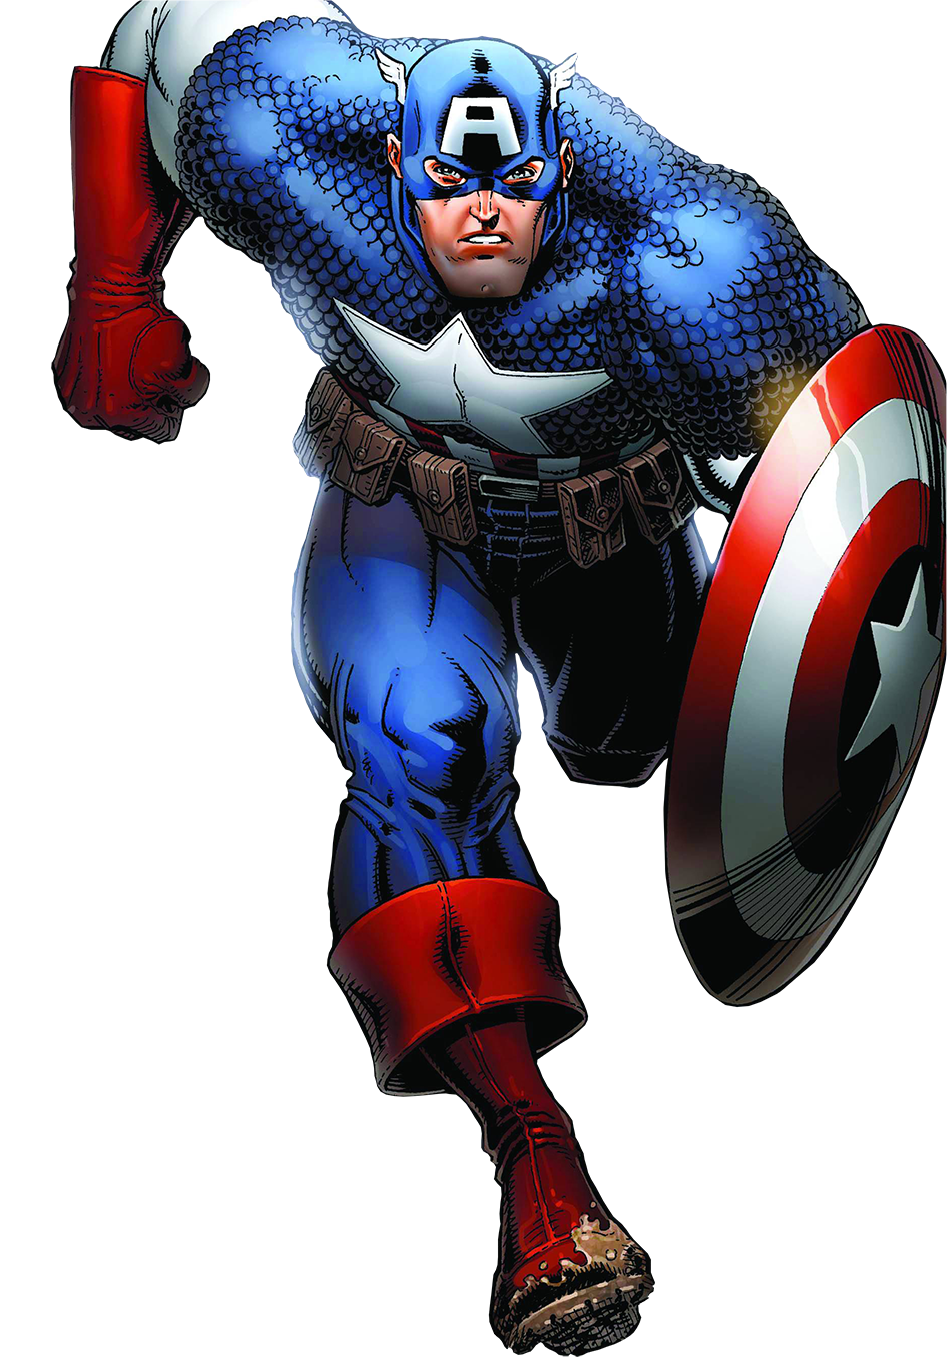 Captain America PNG images free download